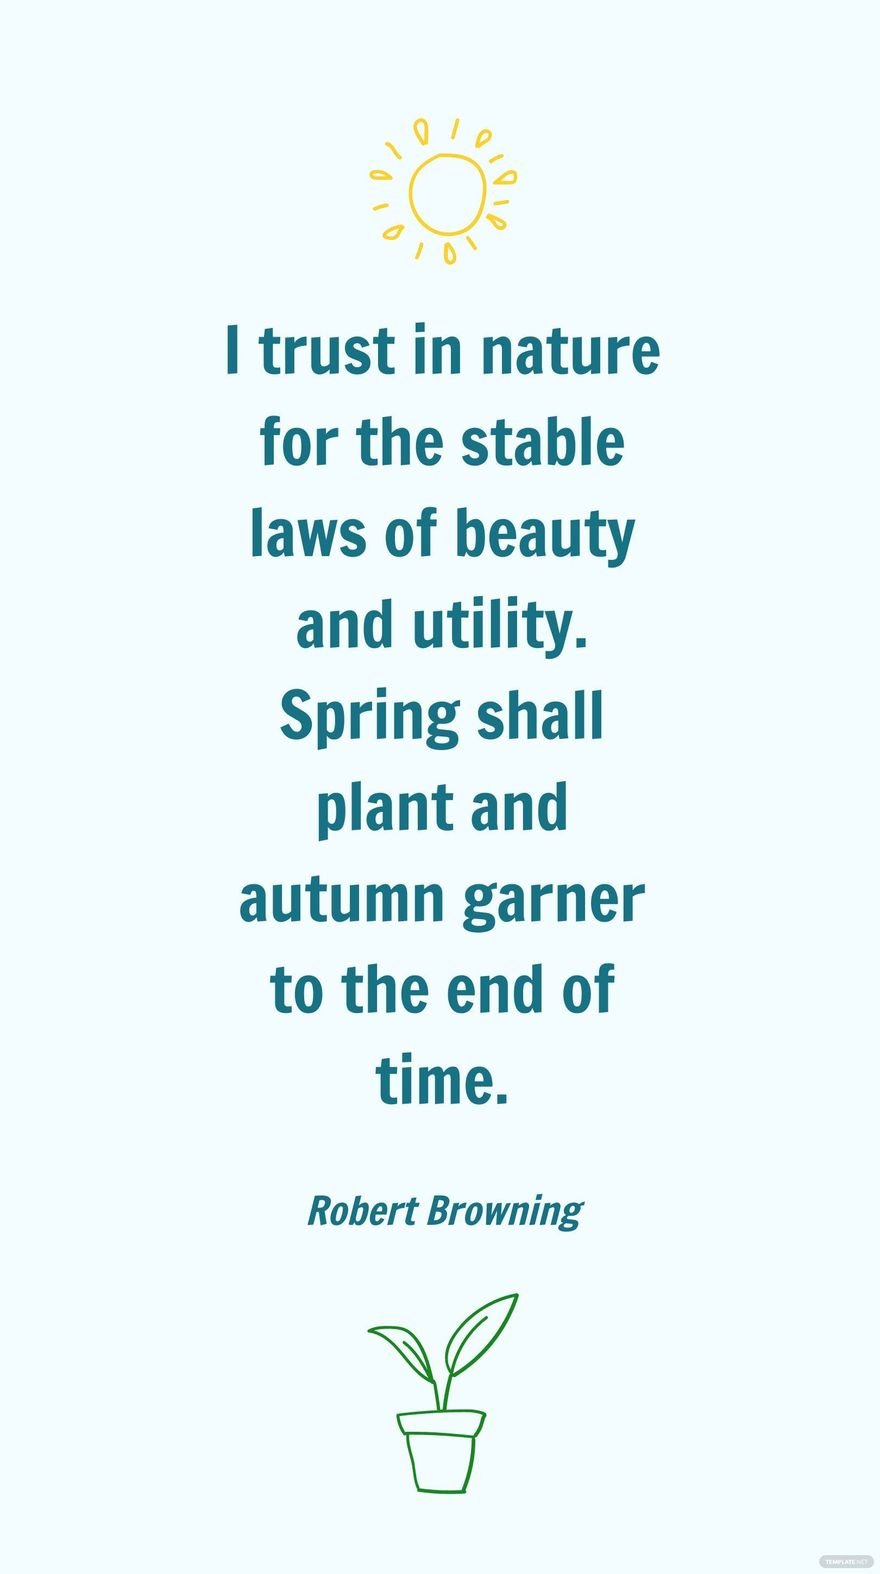 Robert Browning - I trust in nature for the stable laws of beauty and utility. Spring shall plant and autumn garner to the end of time. in JPG